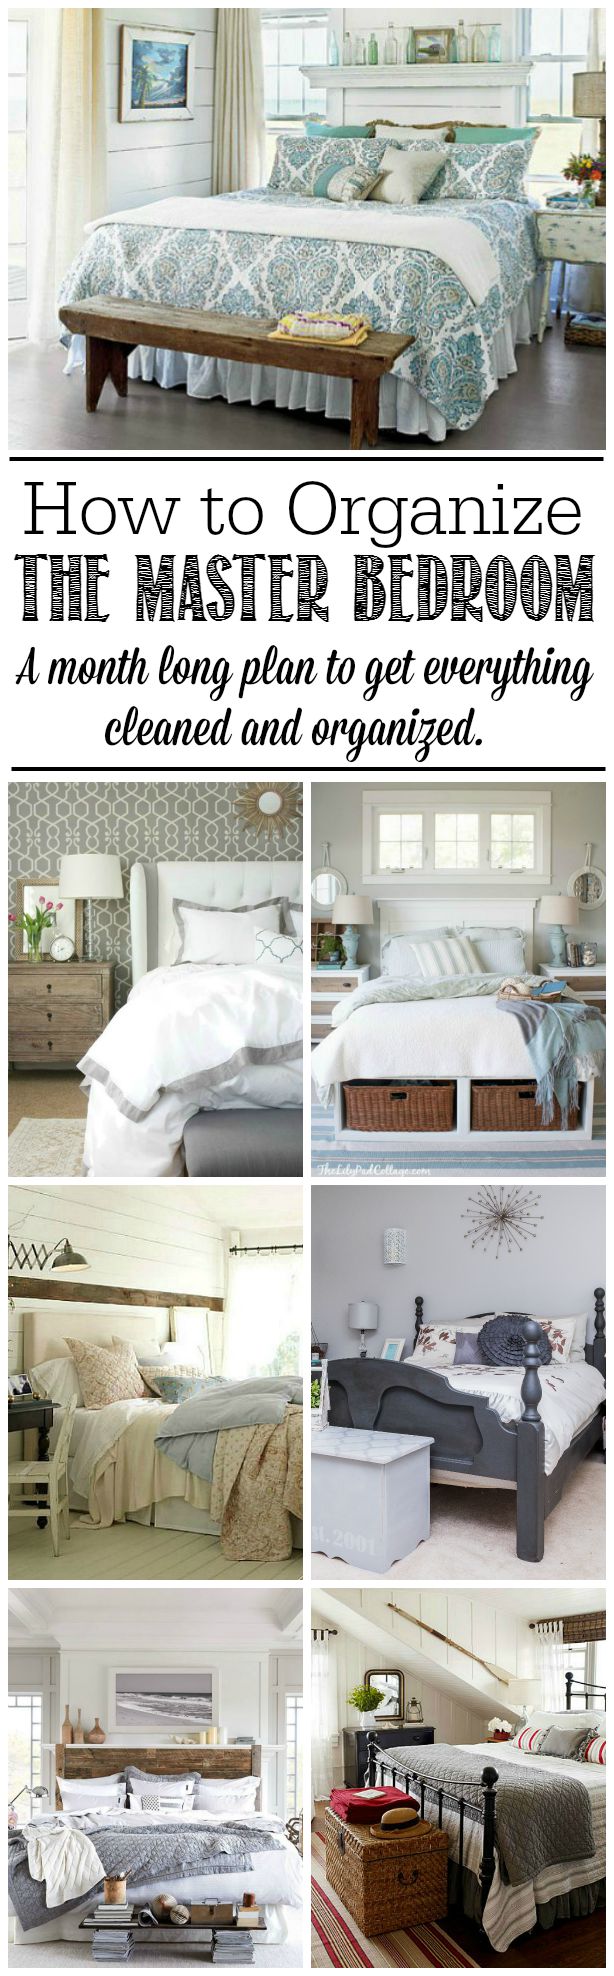 How to Organize the Master Bedroom from Best of the Blogosphere Link Party Week 36